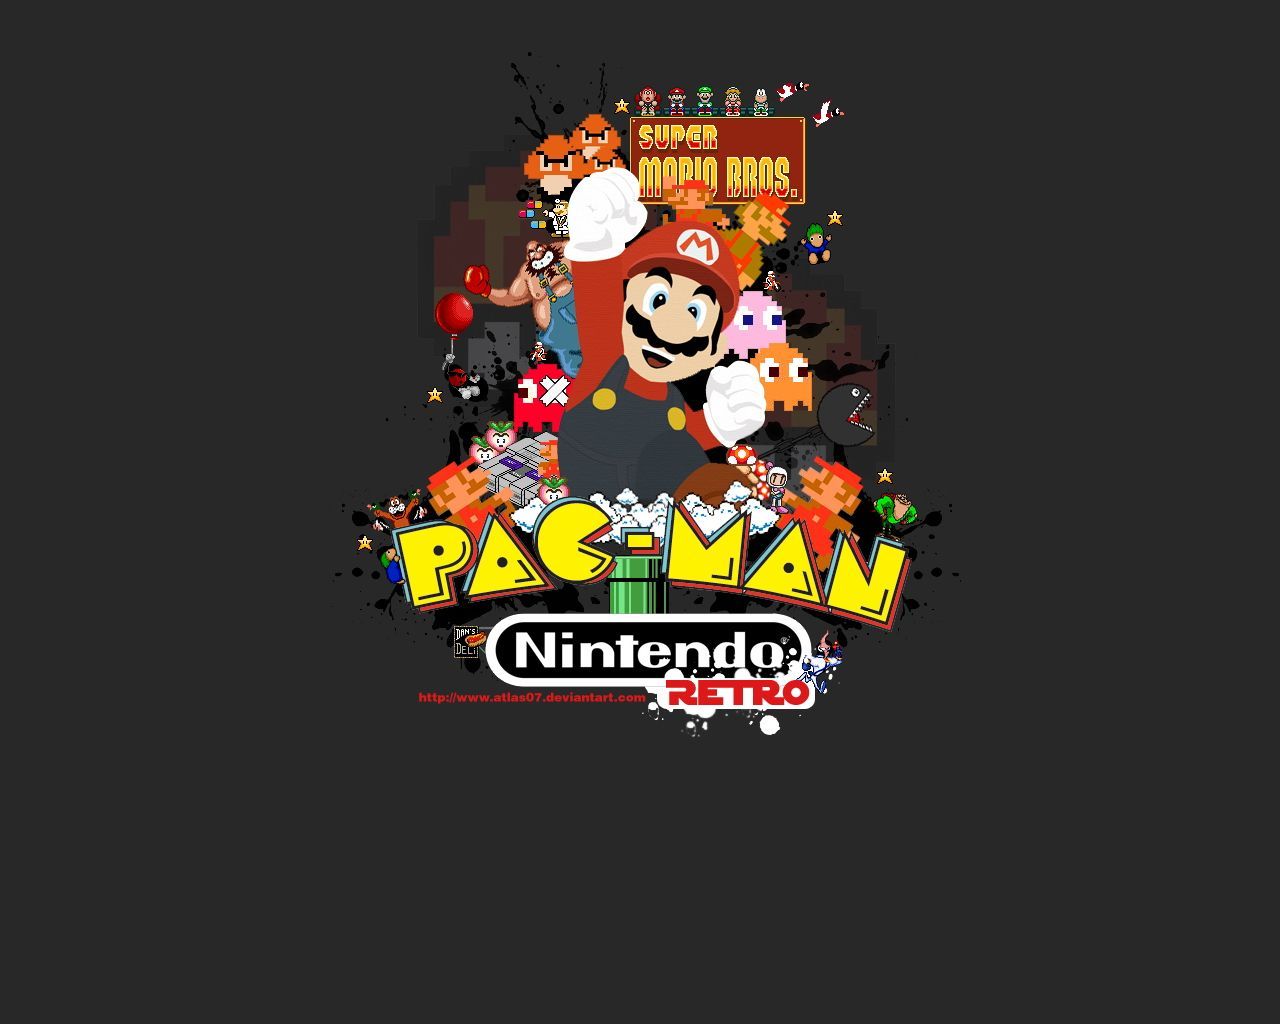 Cool Video Game Wallpaper Nintendo Check out more geek stuff , a place for geek. Retro wallpaper, Retro games wallpaper, Retro artwork